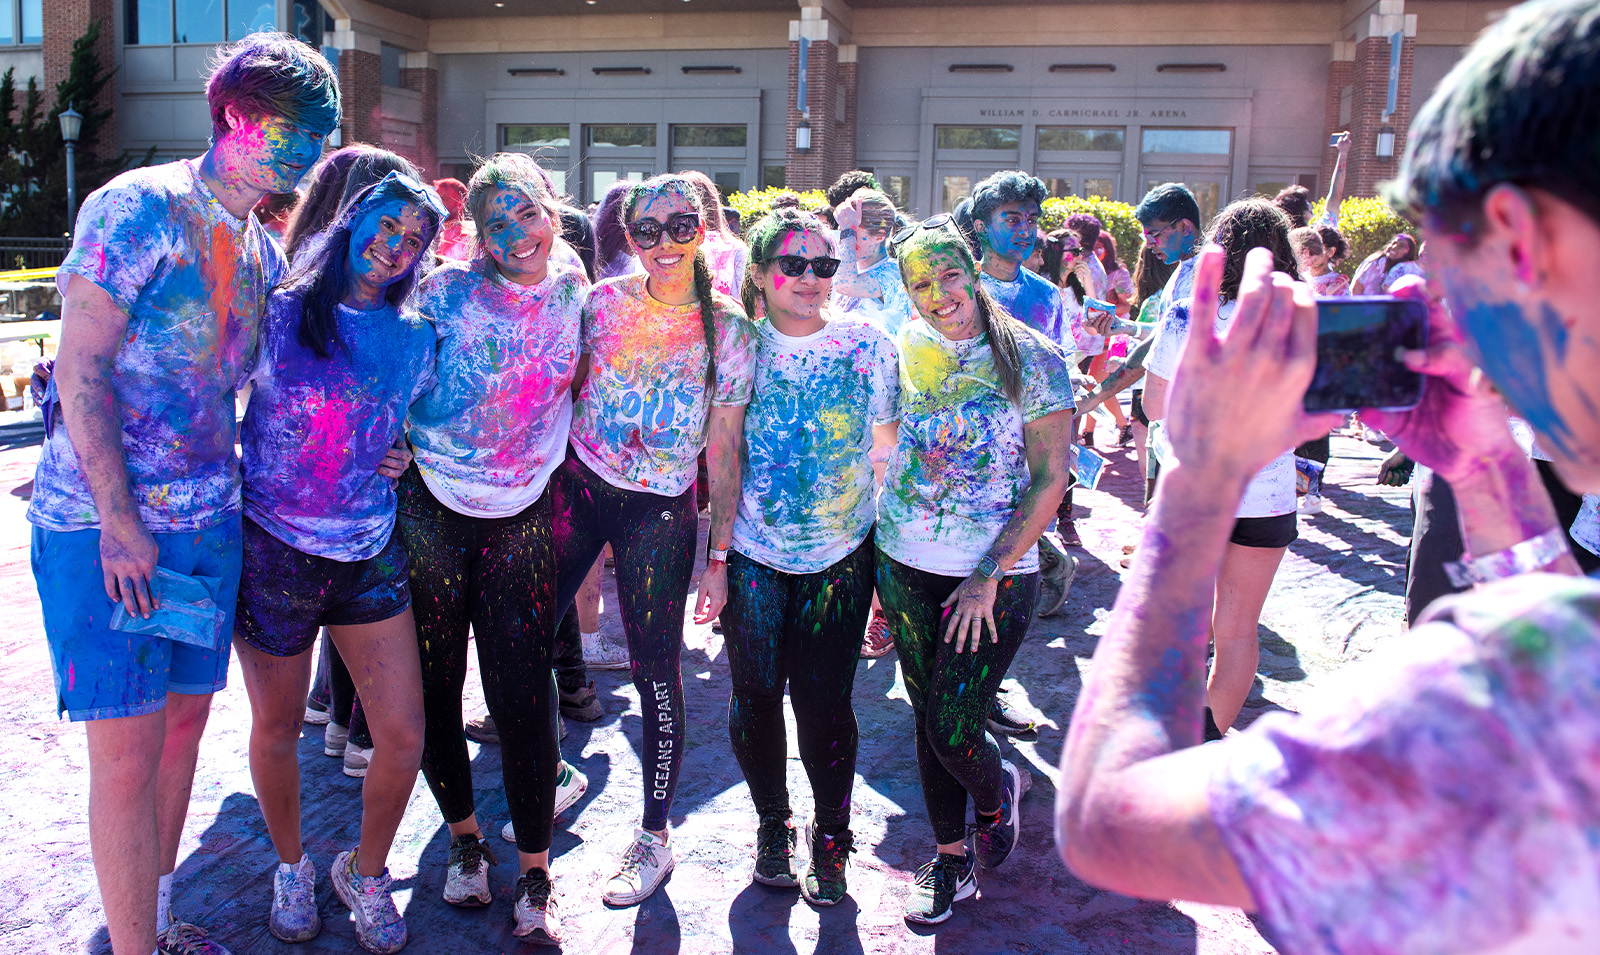 Crowd of students covered in paint celebrating Holi and posing for a group photo.